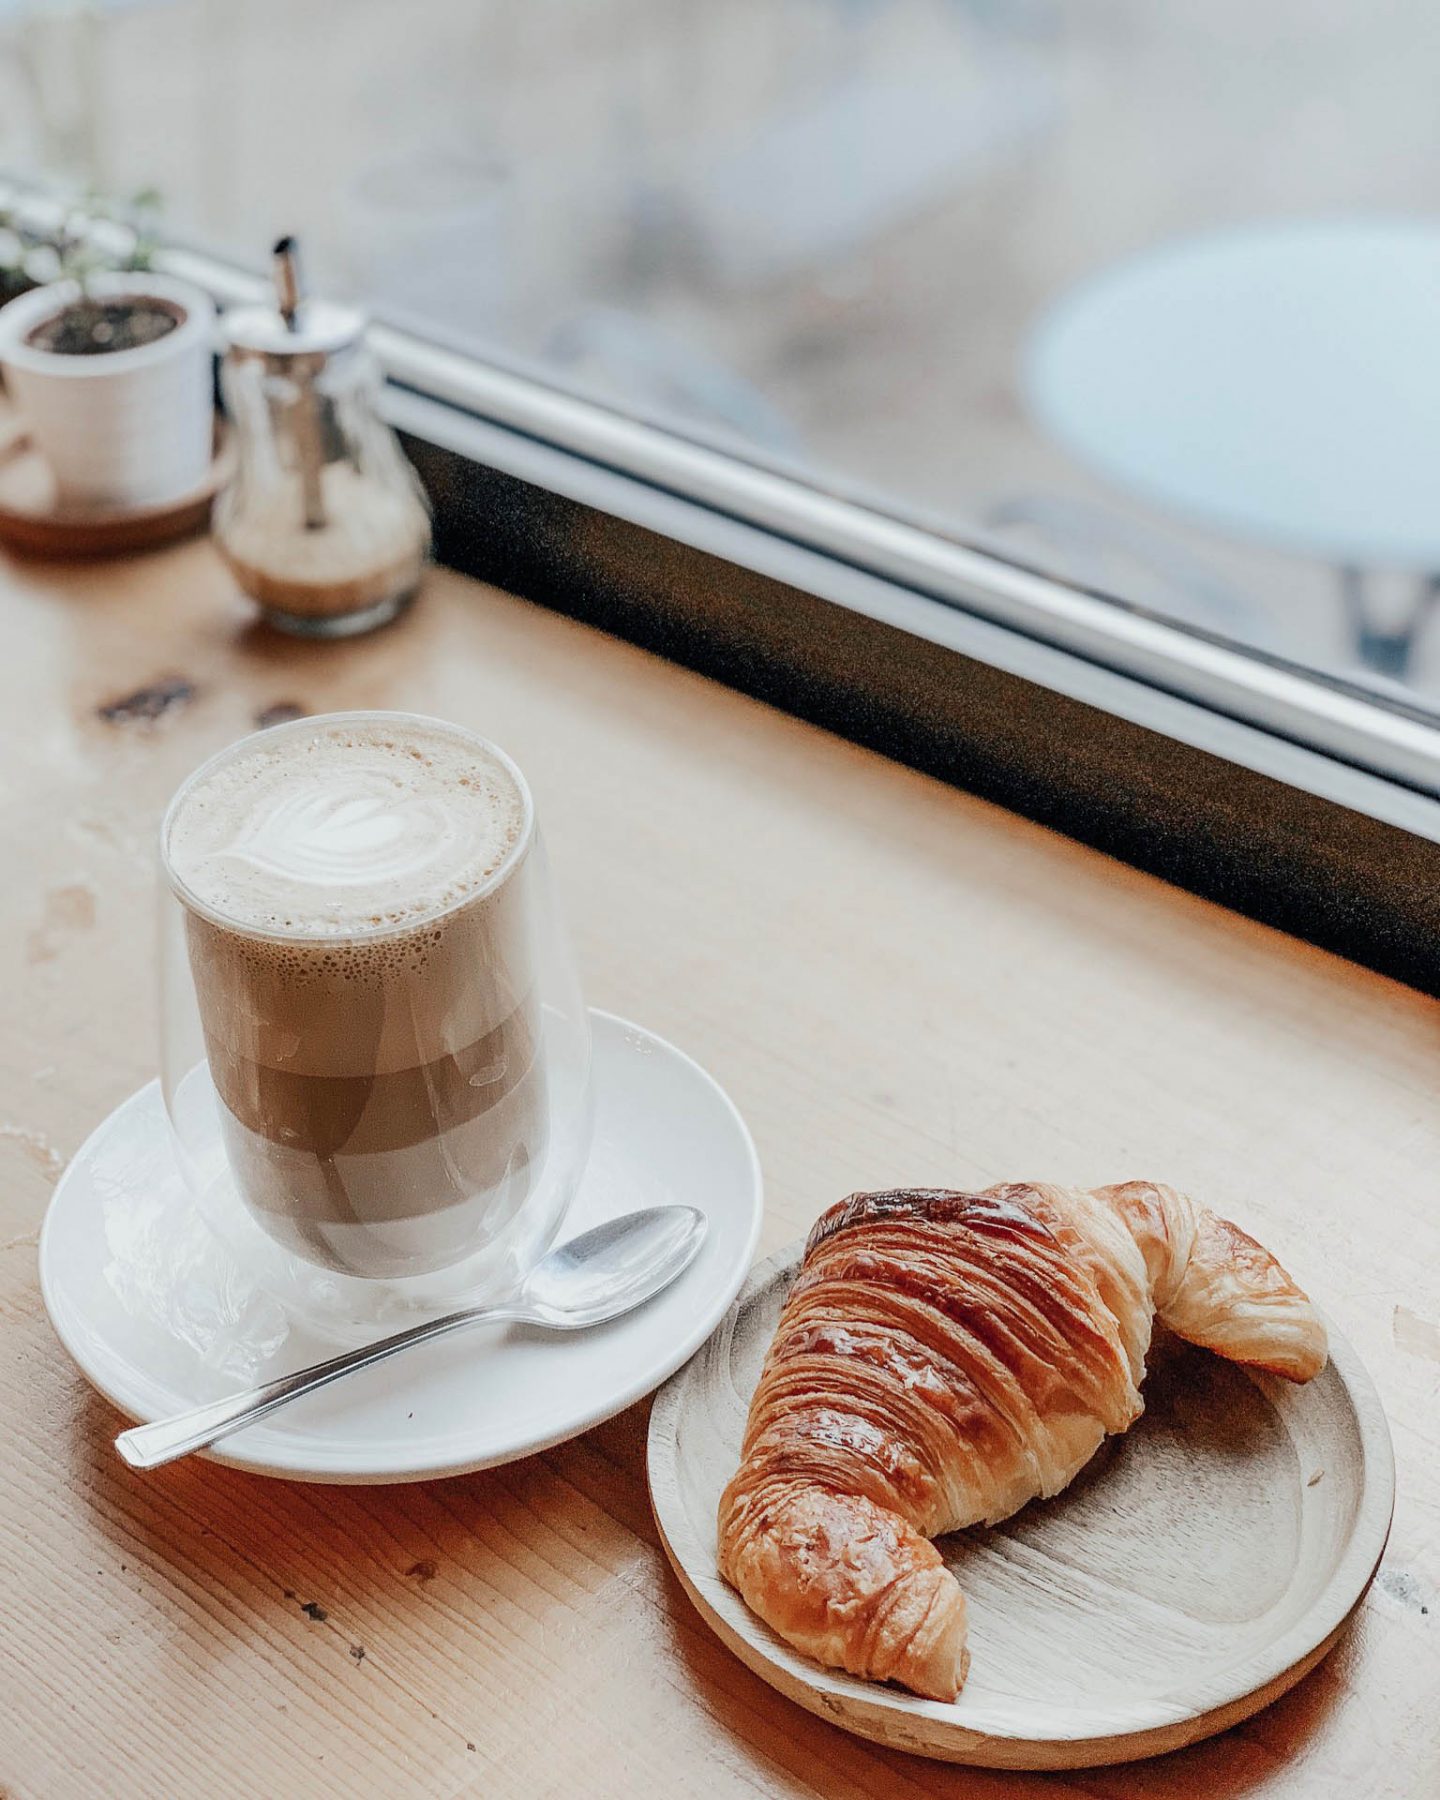 Where to get coffee in Paris